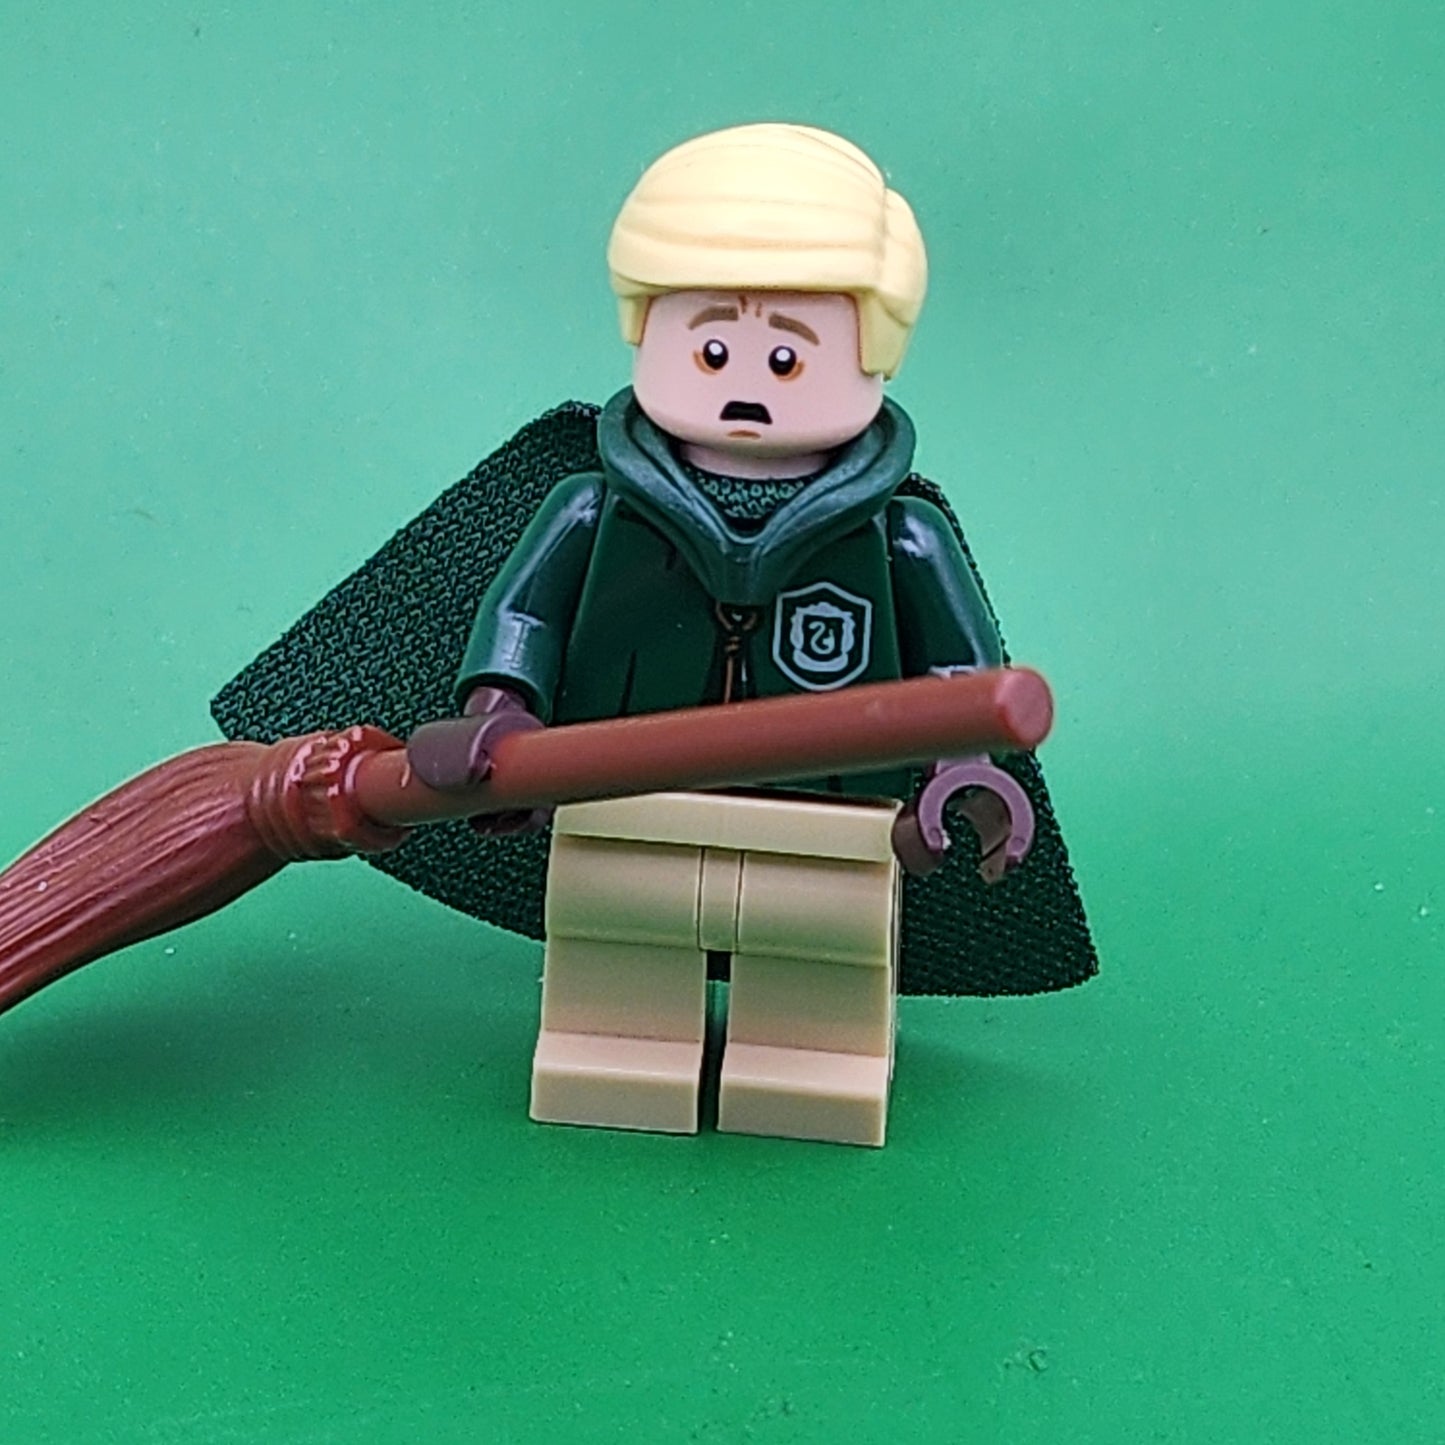 Lego Draco Malfoy Minifigure Slytherin Quidditch Hood Cape Green hp430 Harry Potter